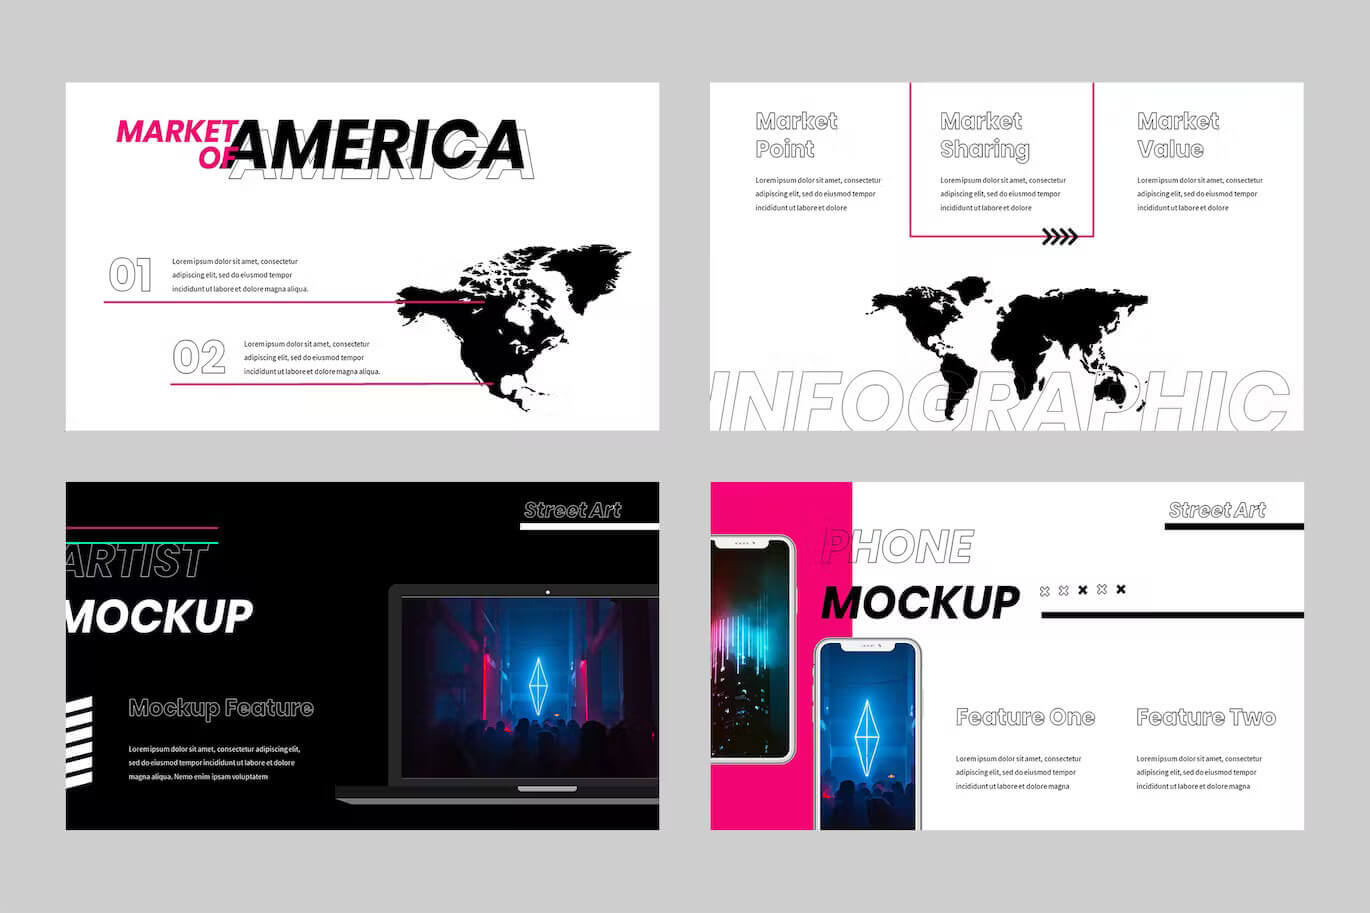 Market of America and Phone Mockup of Artist Powerpoint Presentation.